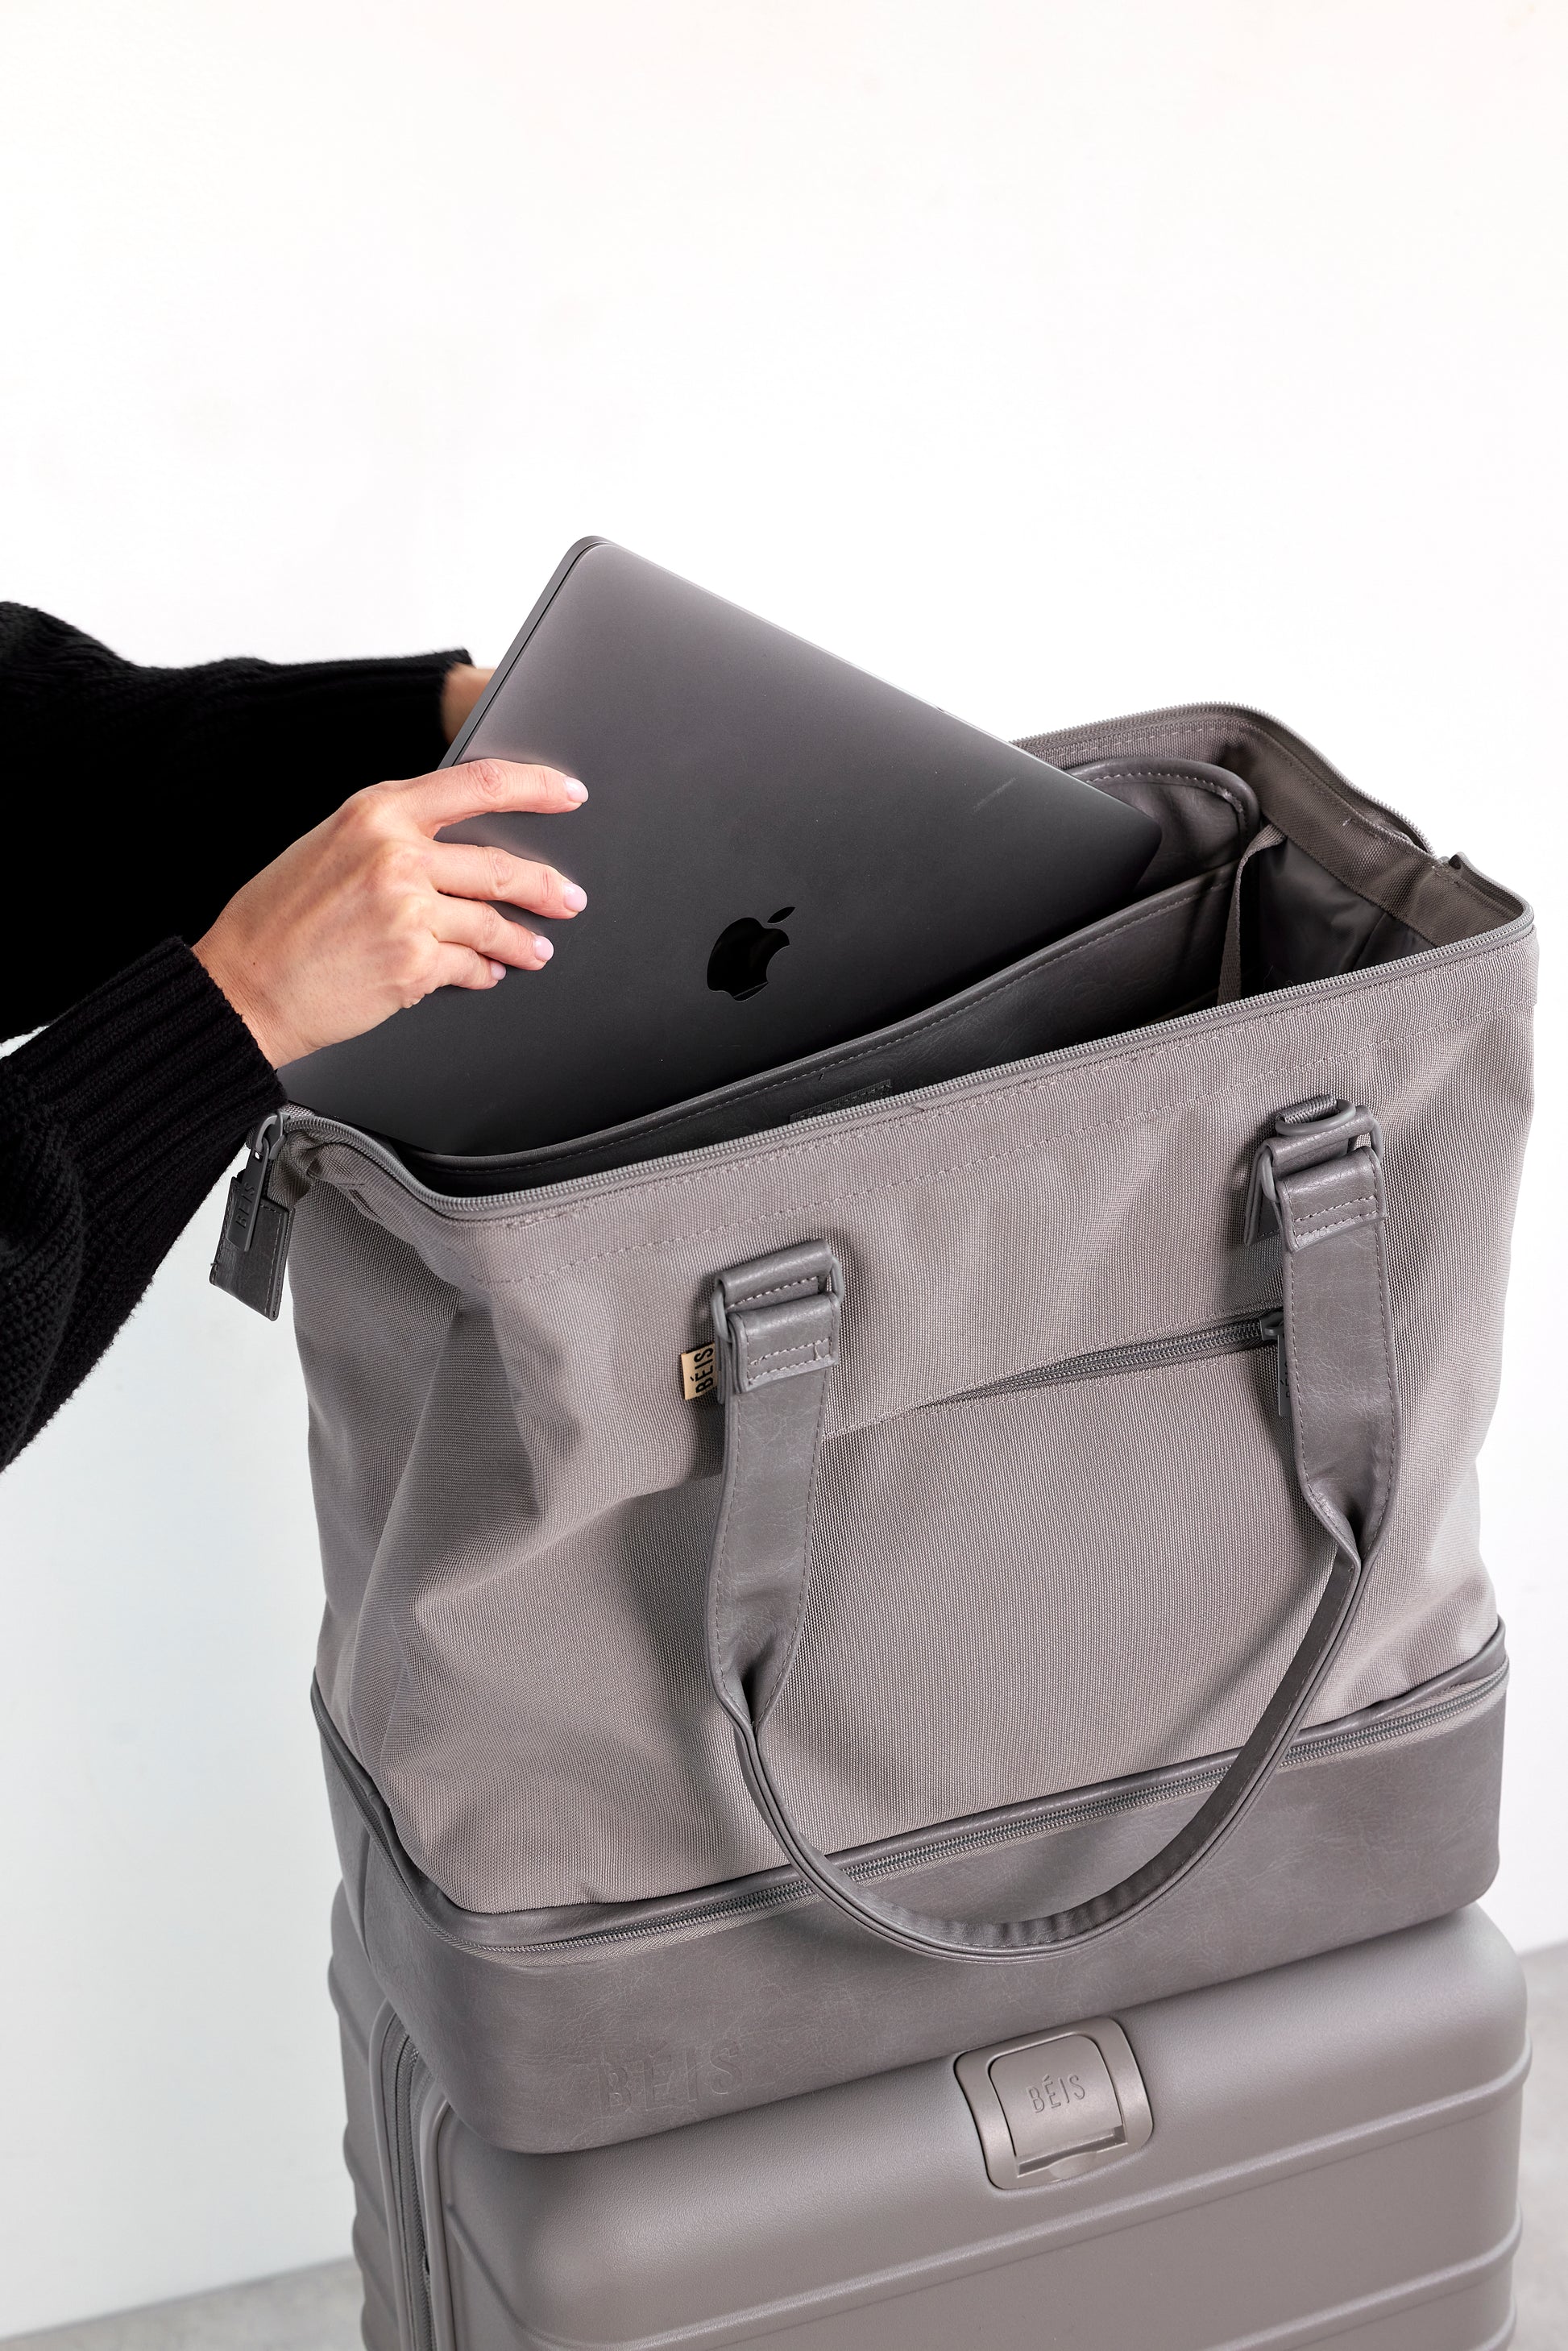 Béis The Mini Weekend Travel Bag in Gray